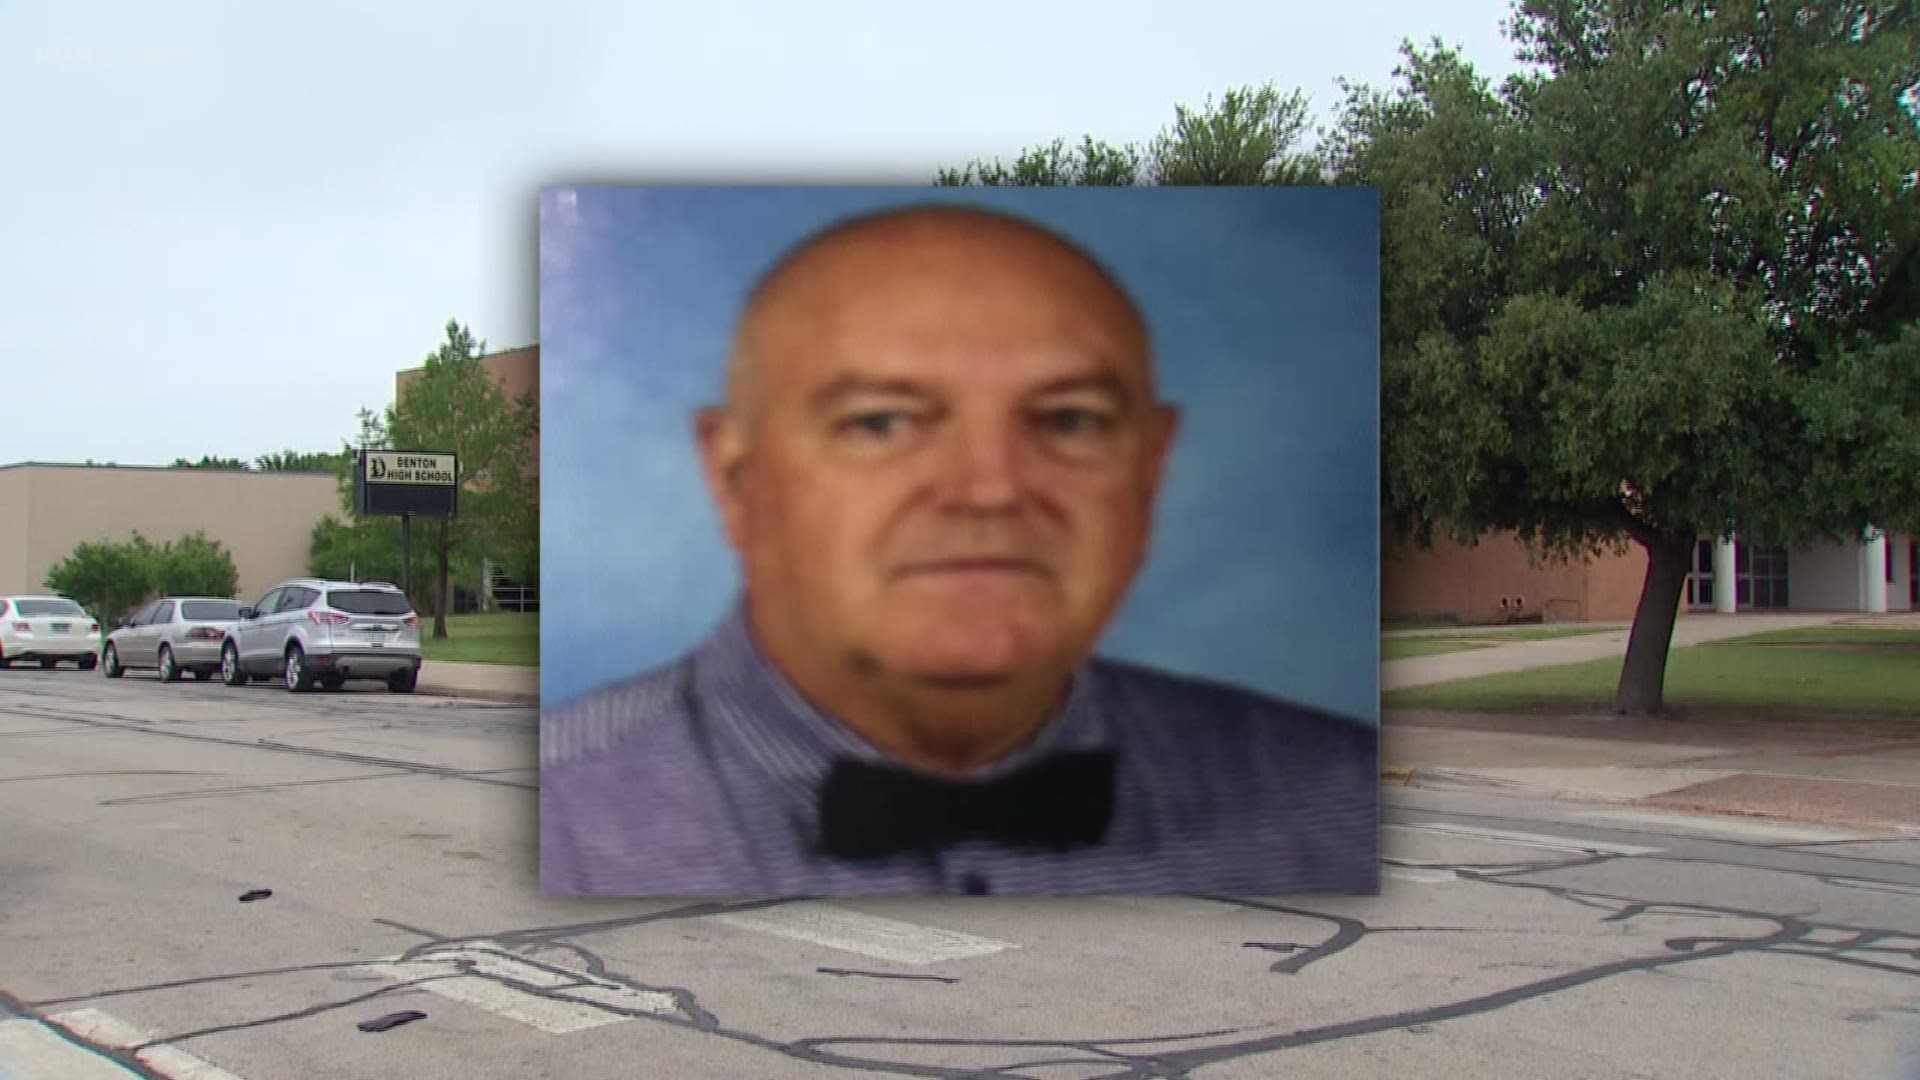 A parent recorded the moment he confronted Assistant Principal Howard Palmer at Denton High School. The parent went to the school because he heard the assistant principal said the N-word when he asked two black students to turn off their music.